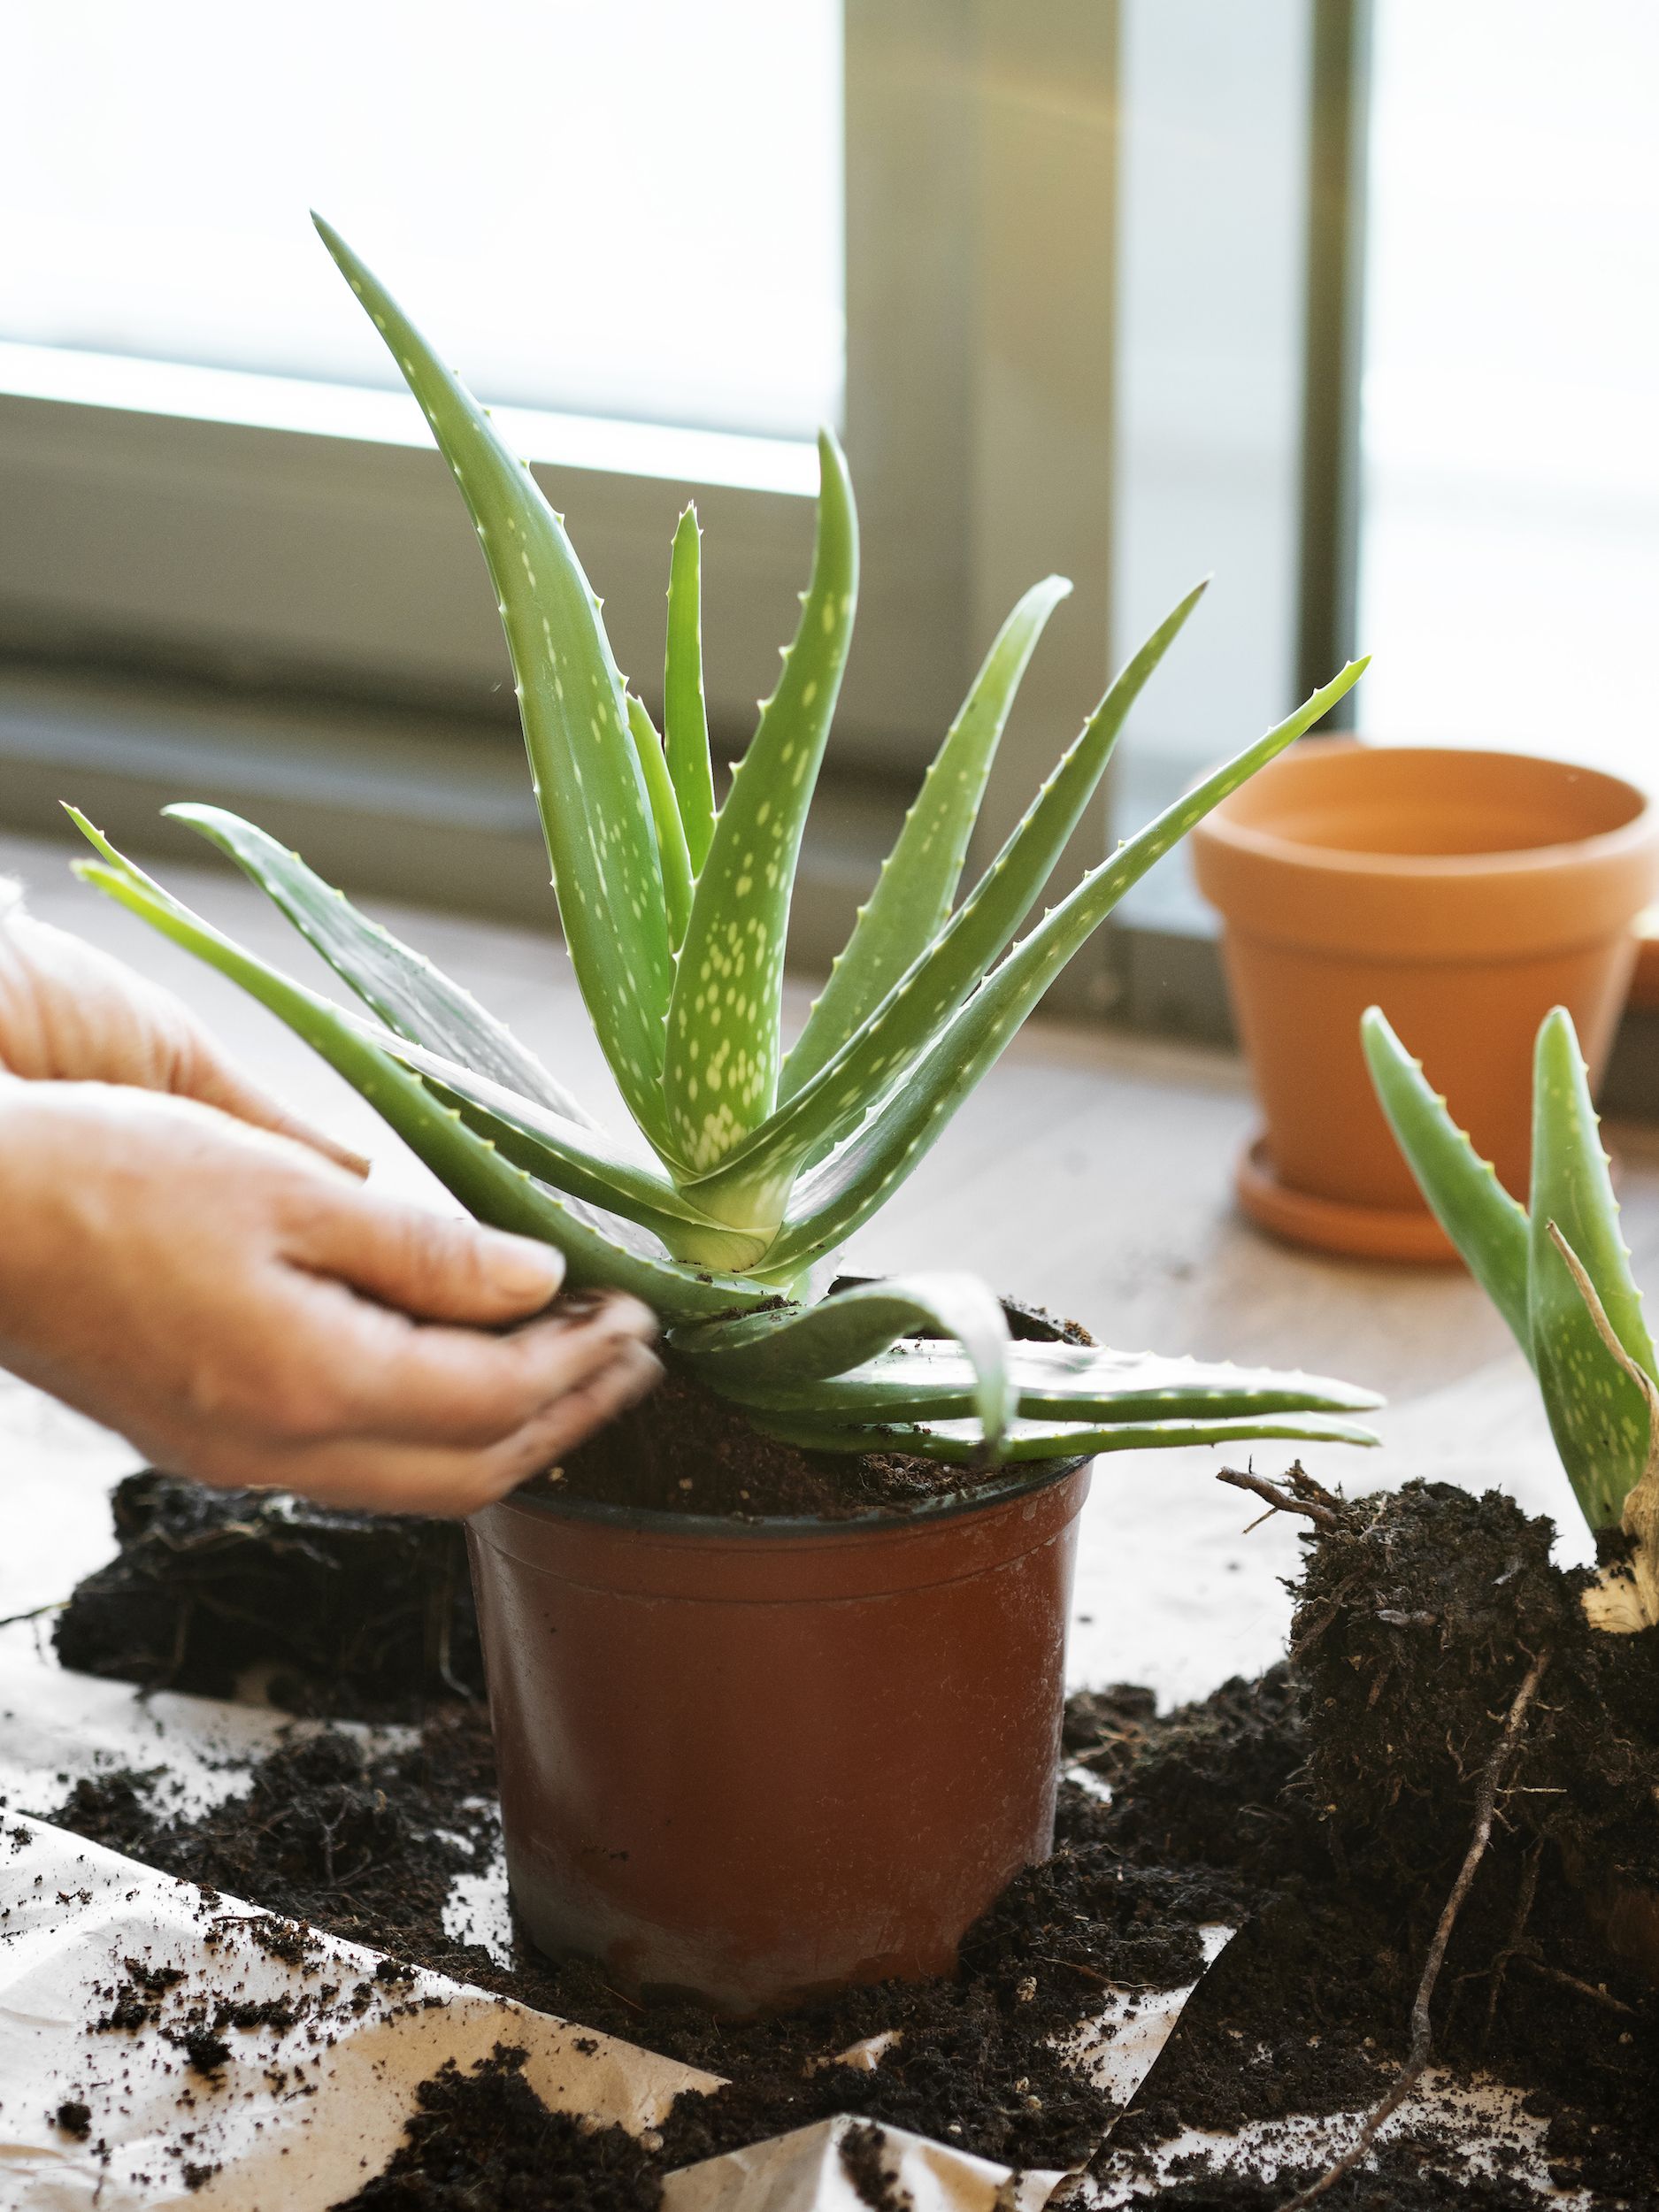 Are aloe plants easy to care for